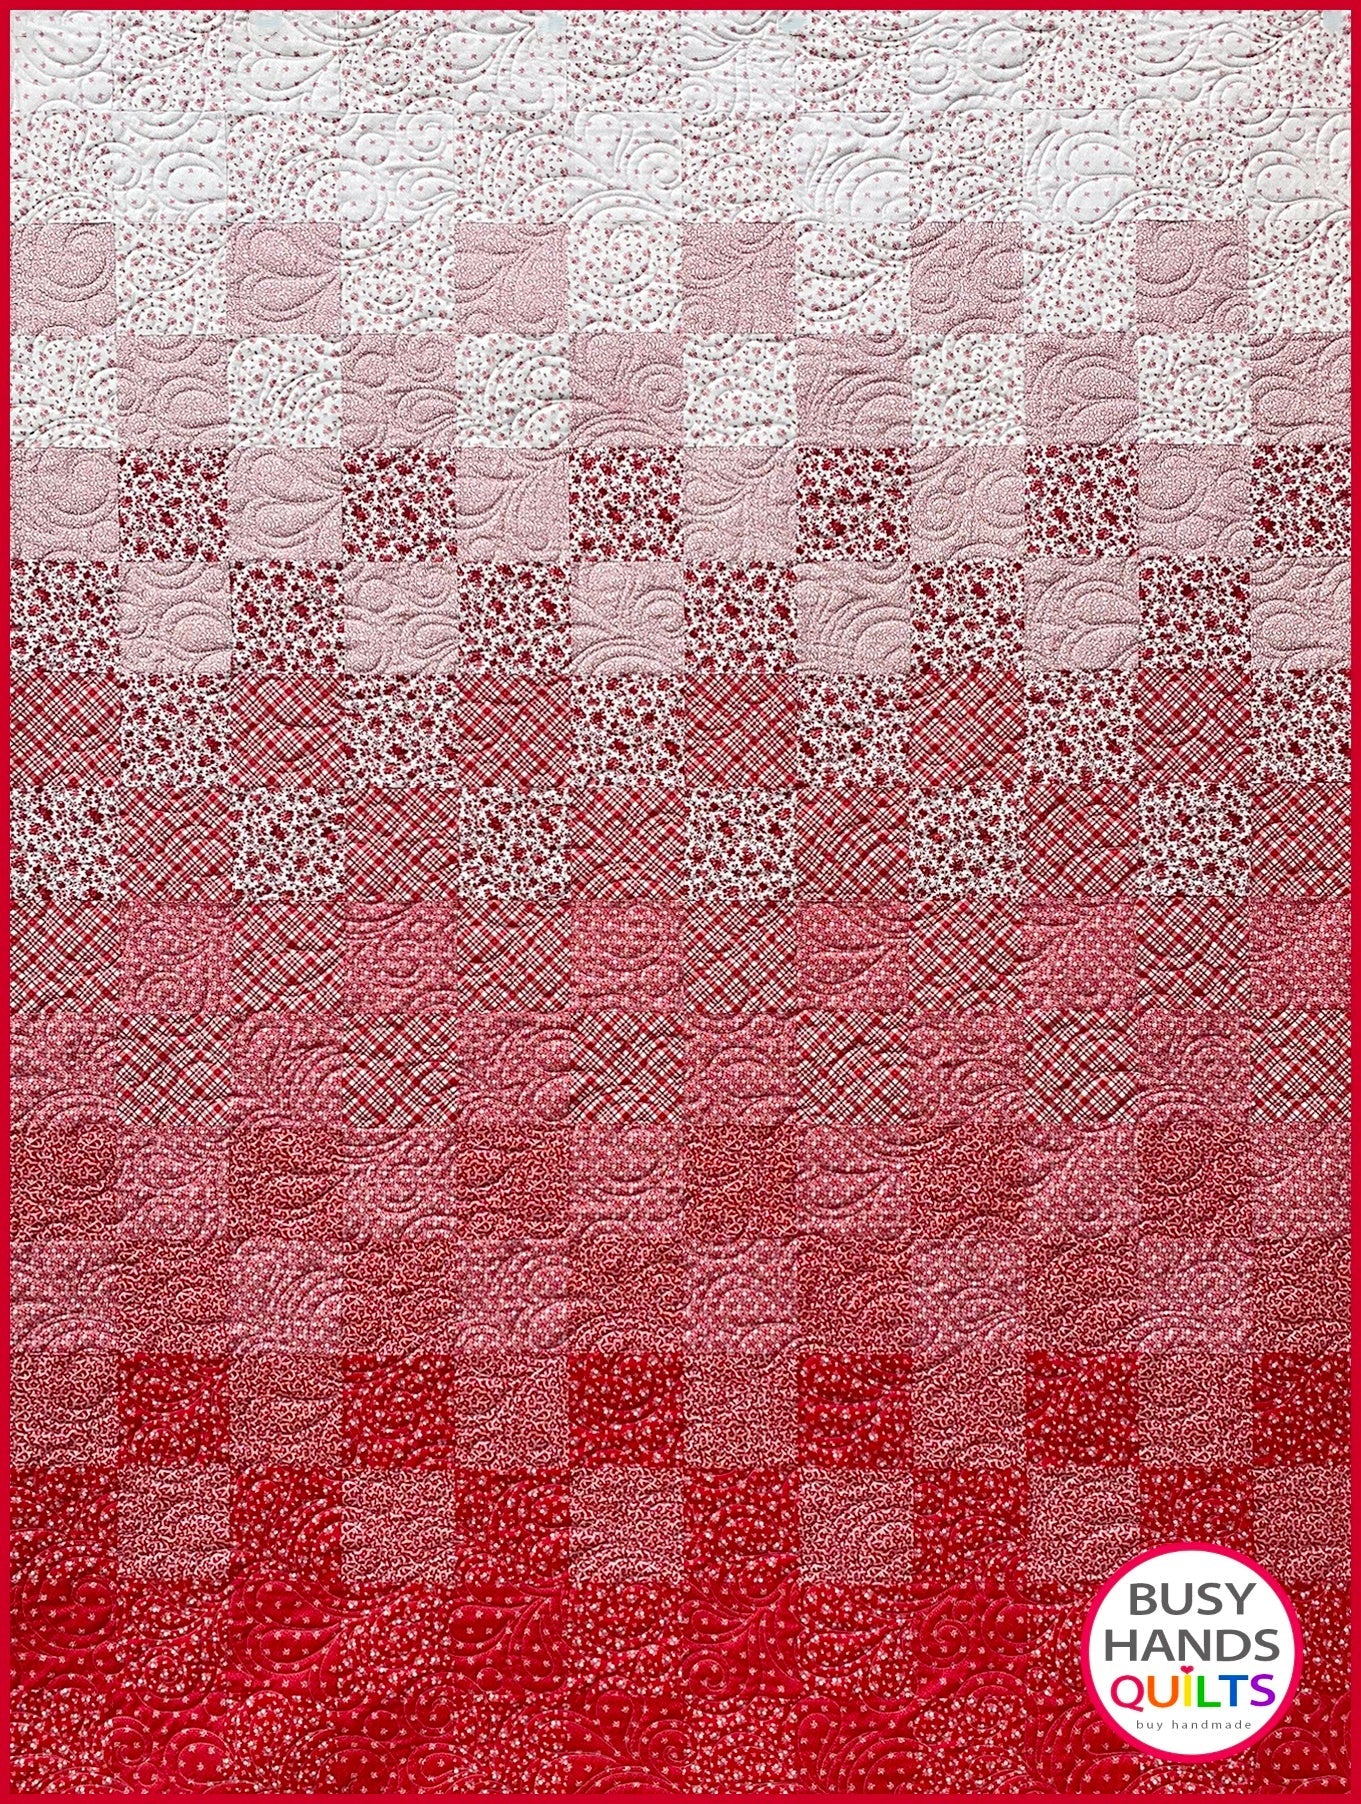 Pixelation Quilt Pattern PDF DOWNLOAD Busy Hands Quilts $12.99